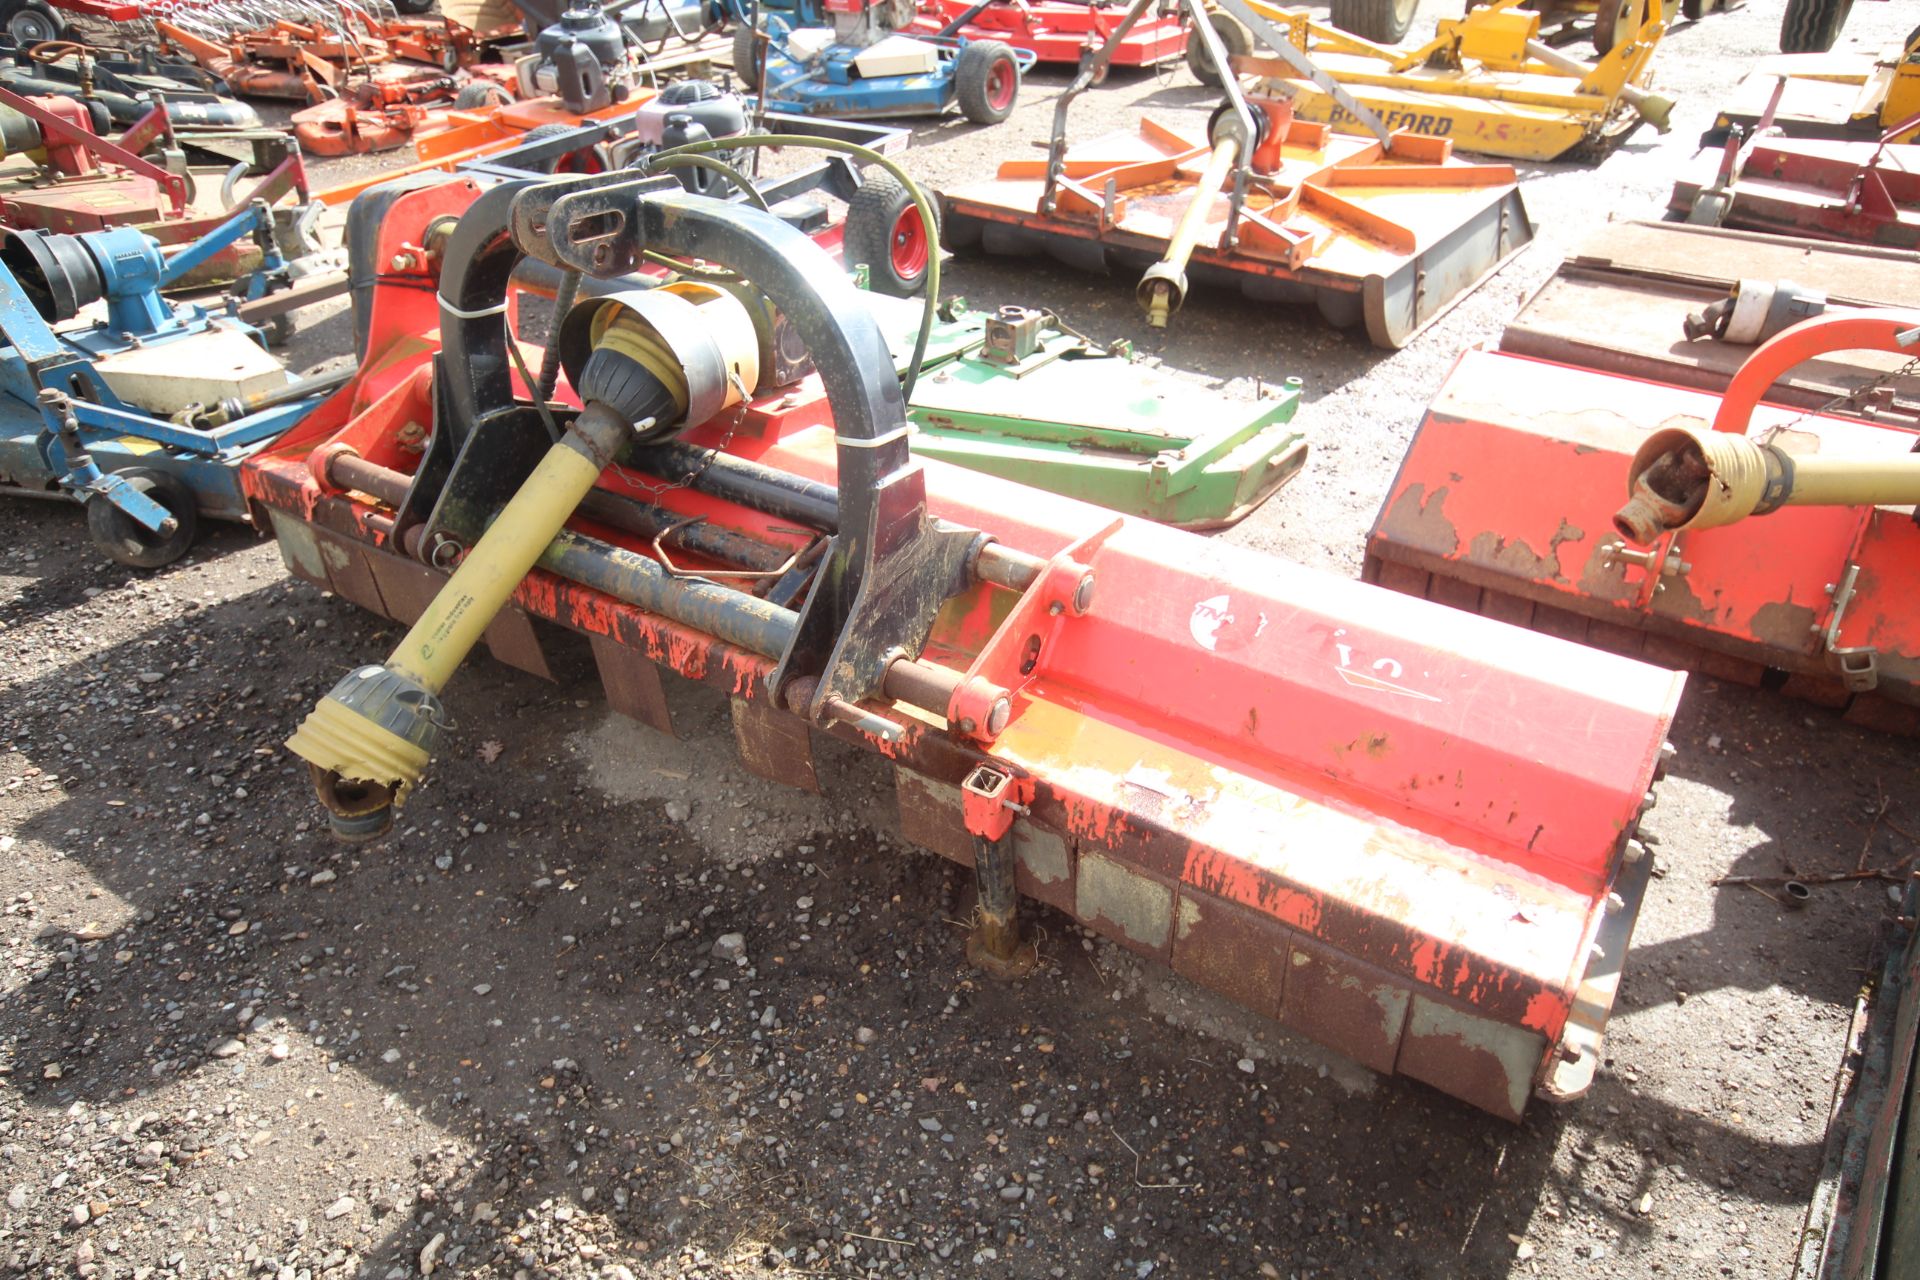 Twose Tornado Elite 7ft6in flail mower. With rear roller and sideshift. V